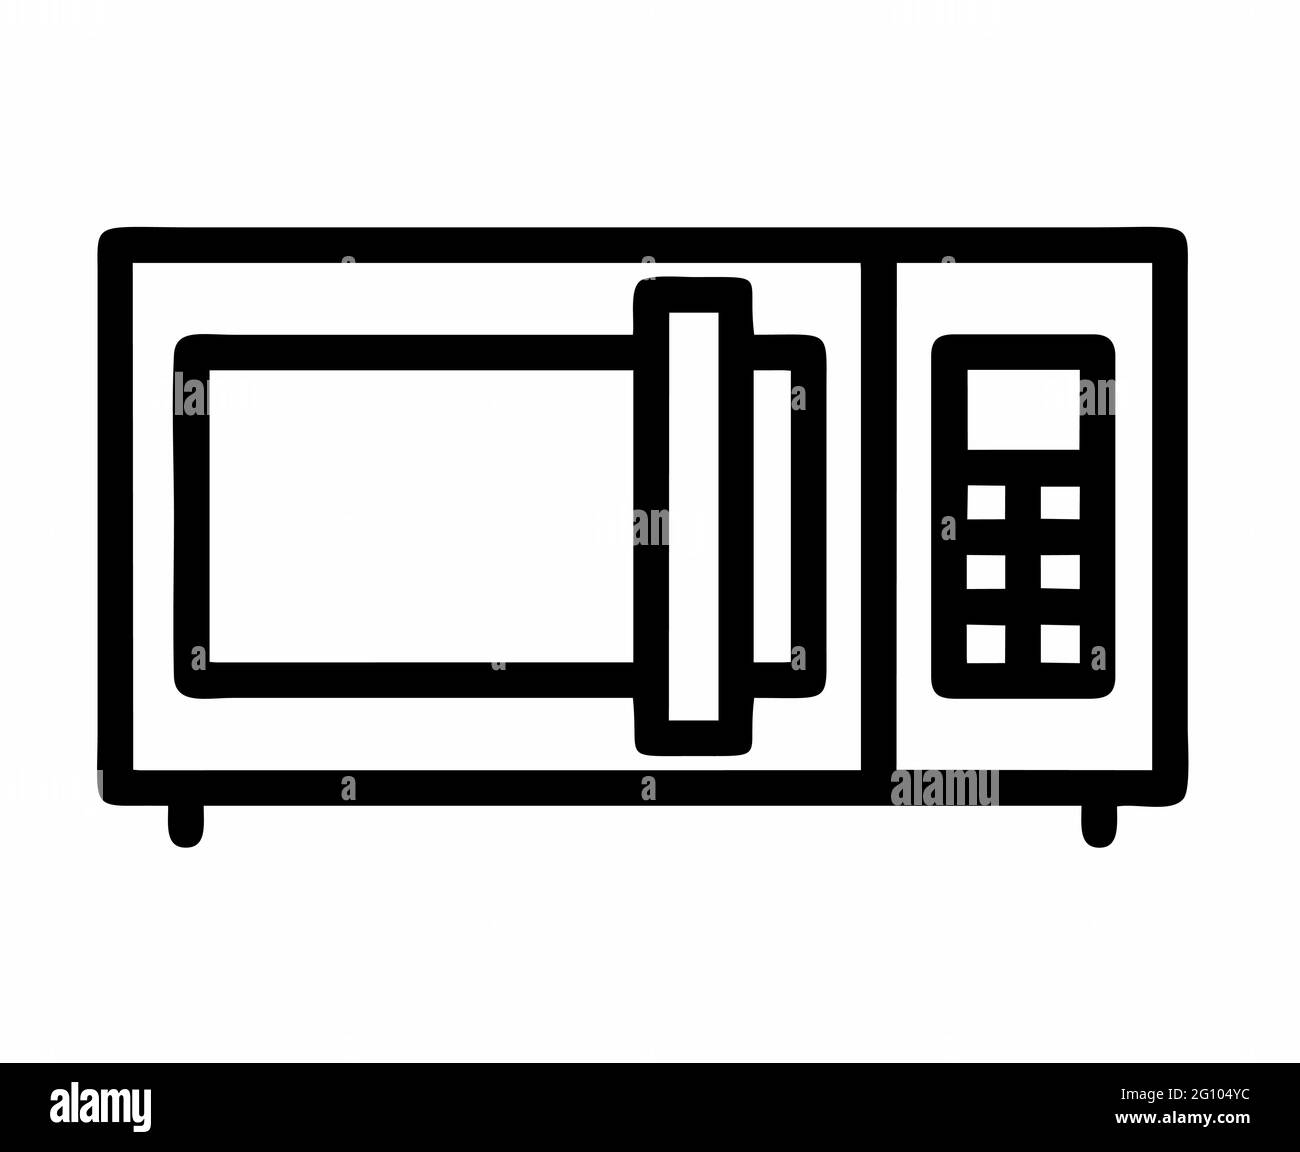 microwave oven isolated vector in black and white for logo, sign, apps or website Stock Vector